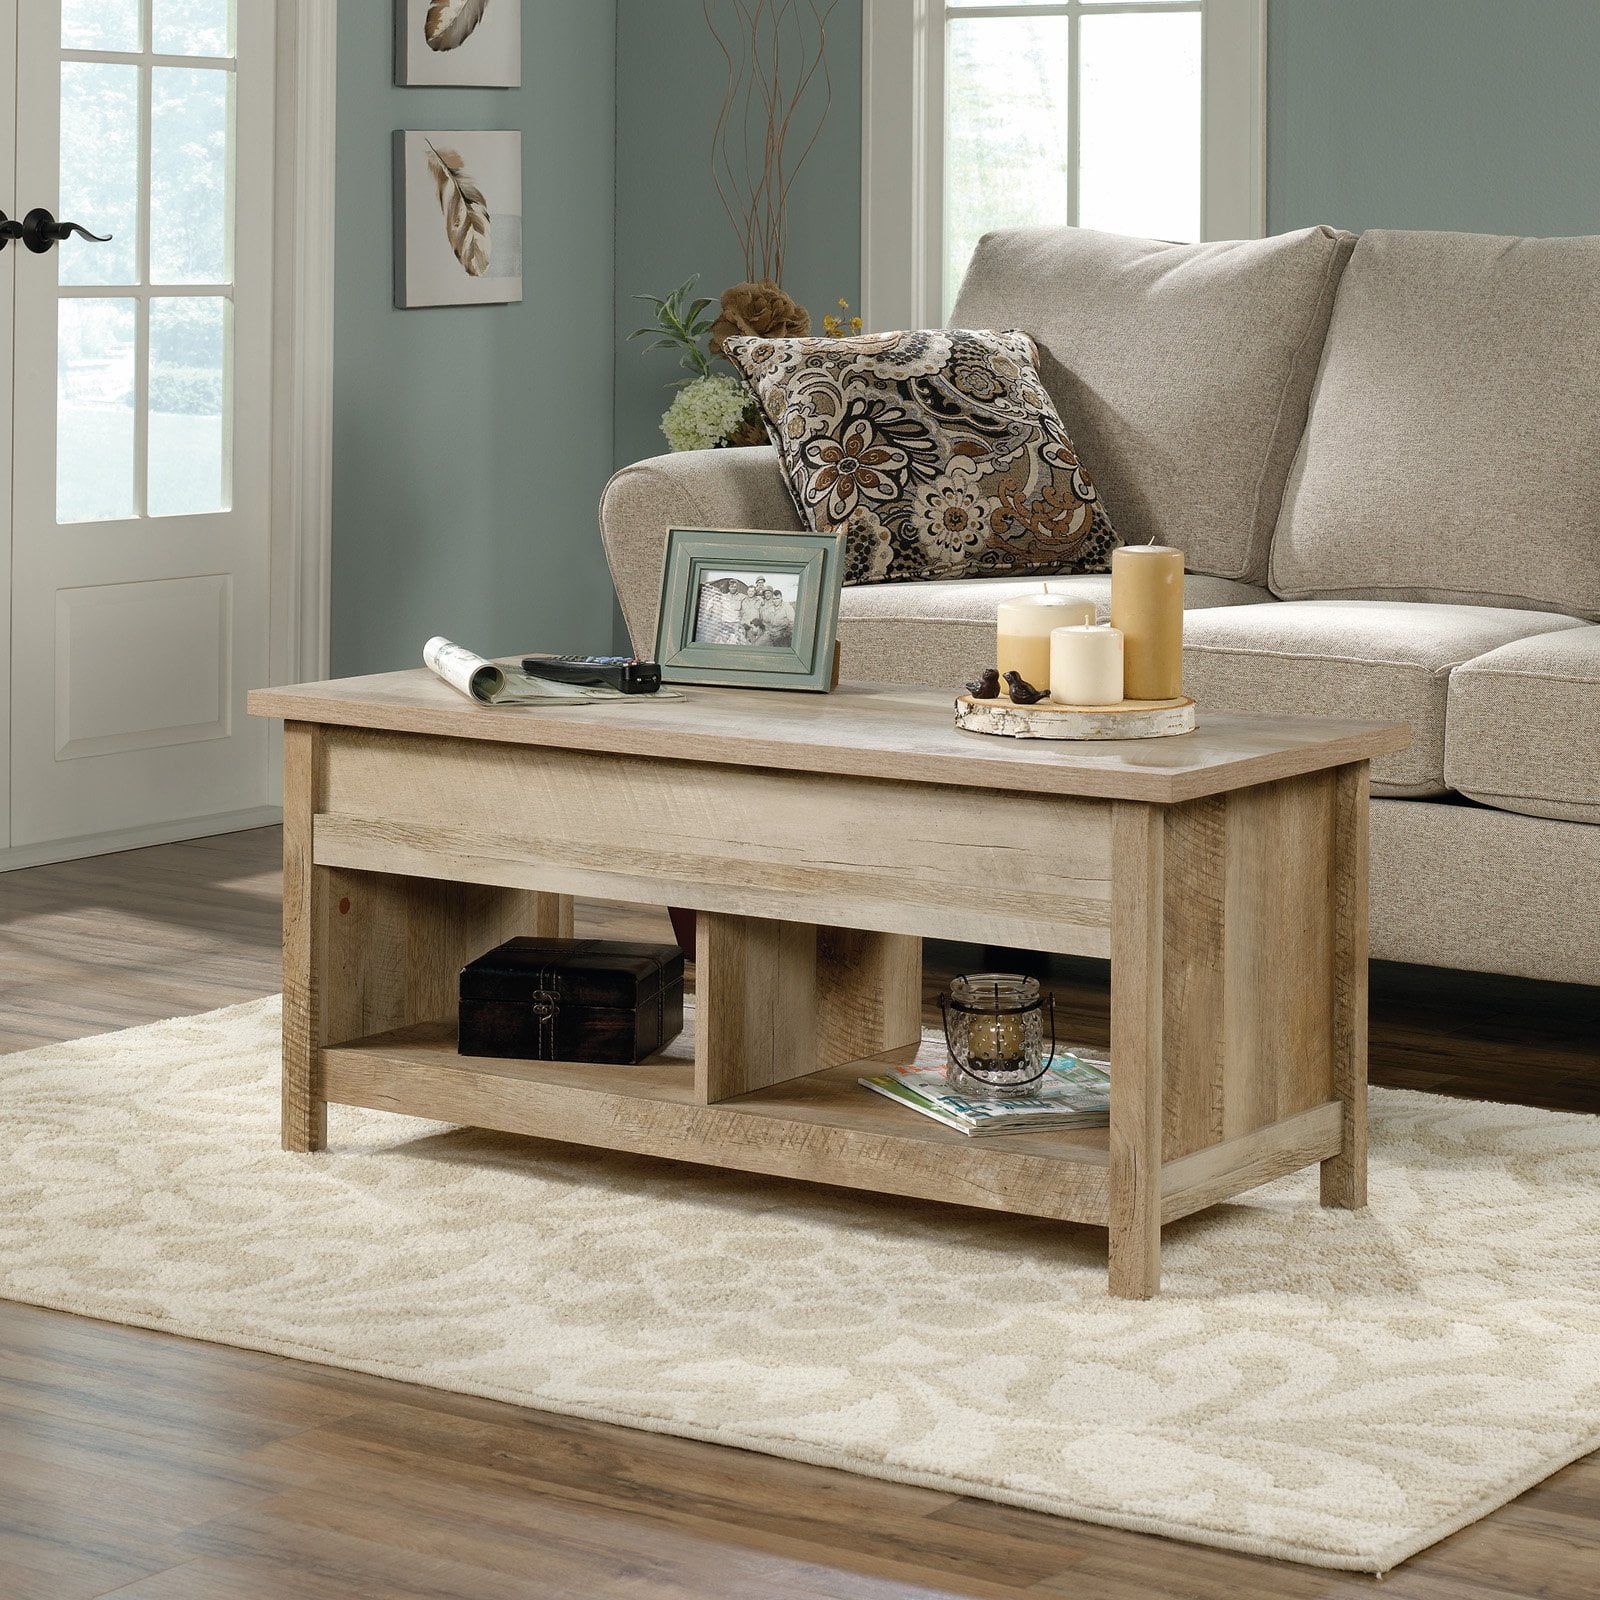 Sauder Modern Farmhouse Lift Top Storage Coffee Table Rustic Oak Finish With Regard To Farmhouse Lift Top Tables (View 14 of 20)